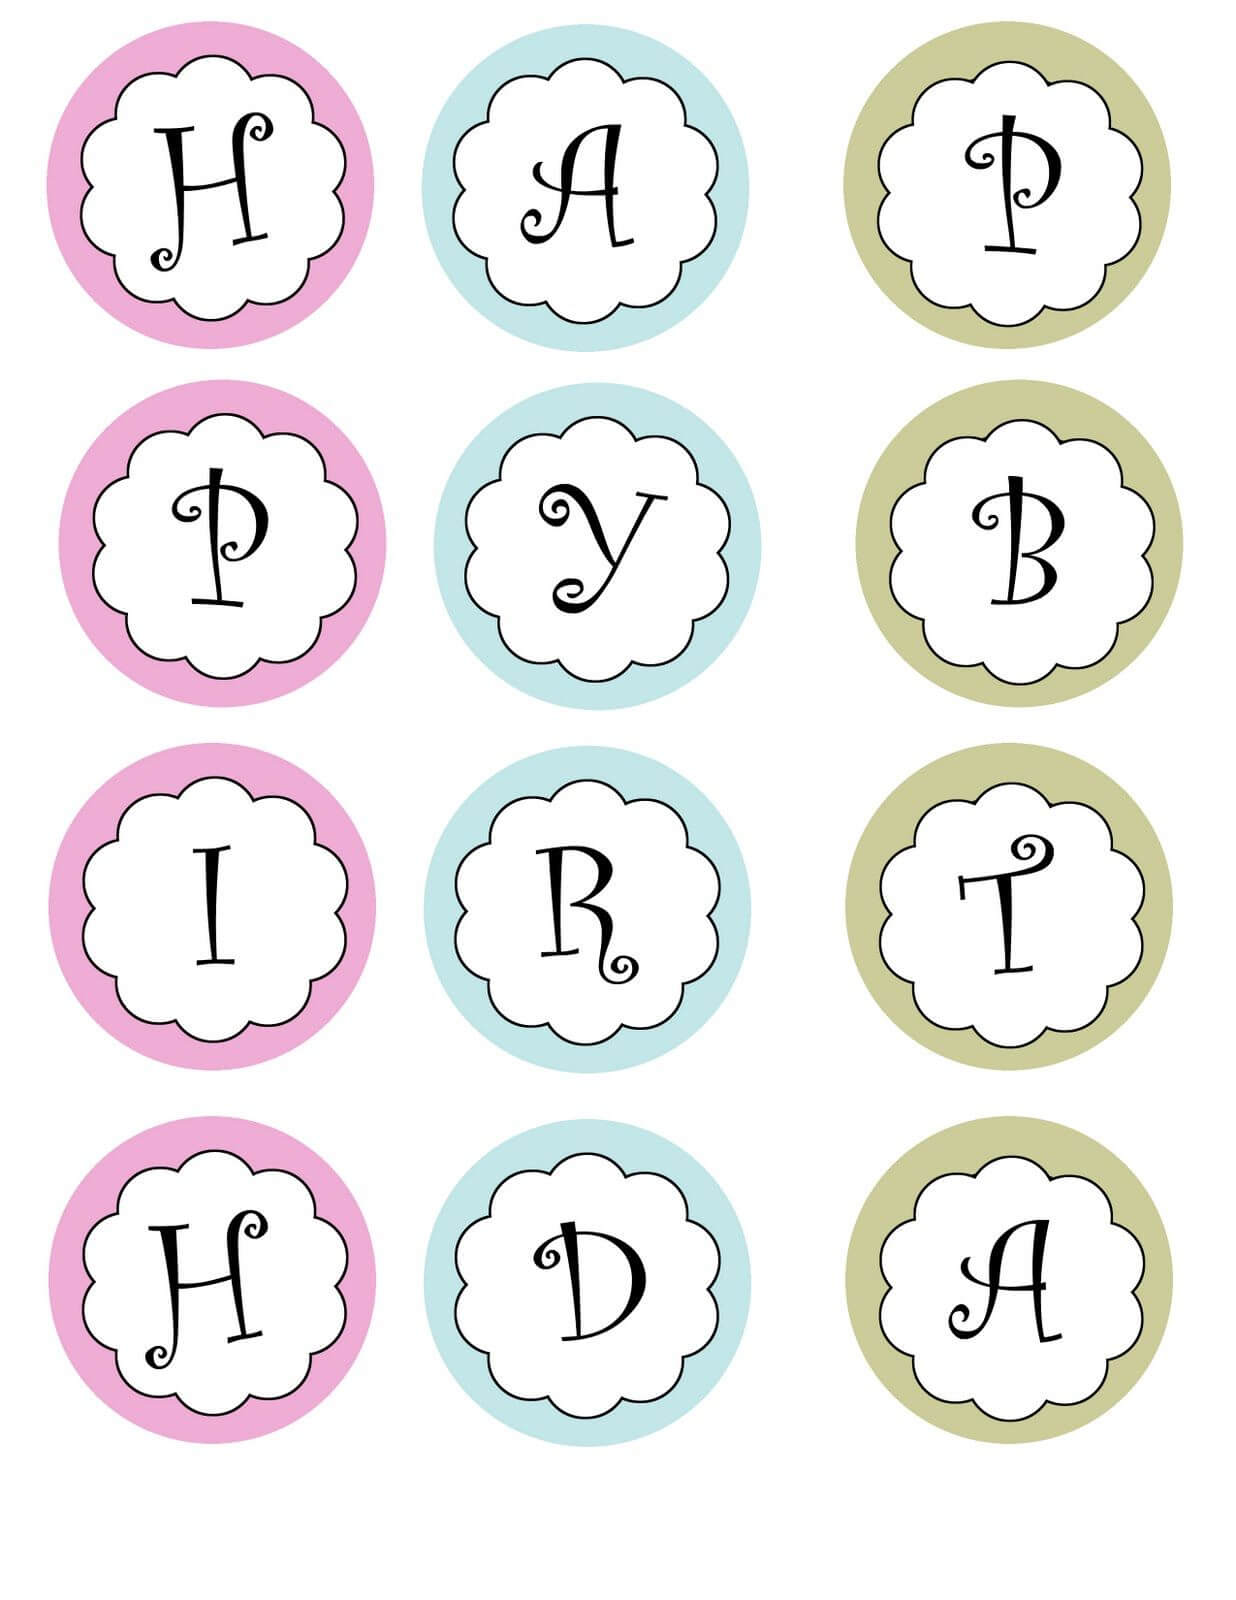 Printable Banners Templates Free | Print Your Own Birthday Intended For Printable Letter Templates For Banners